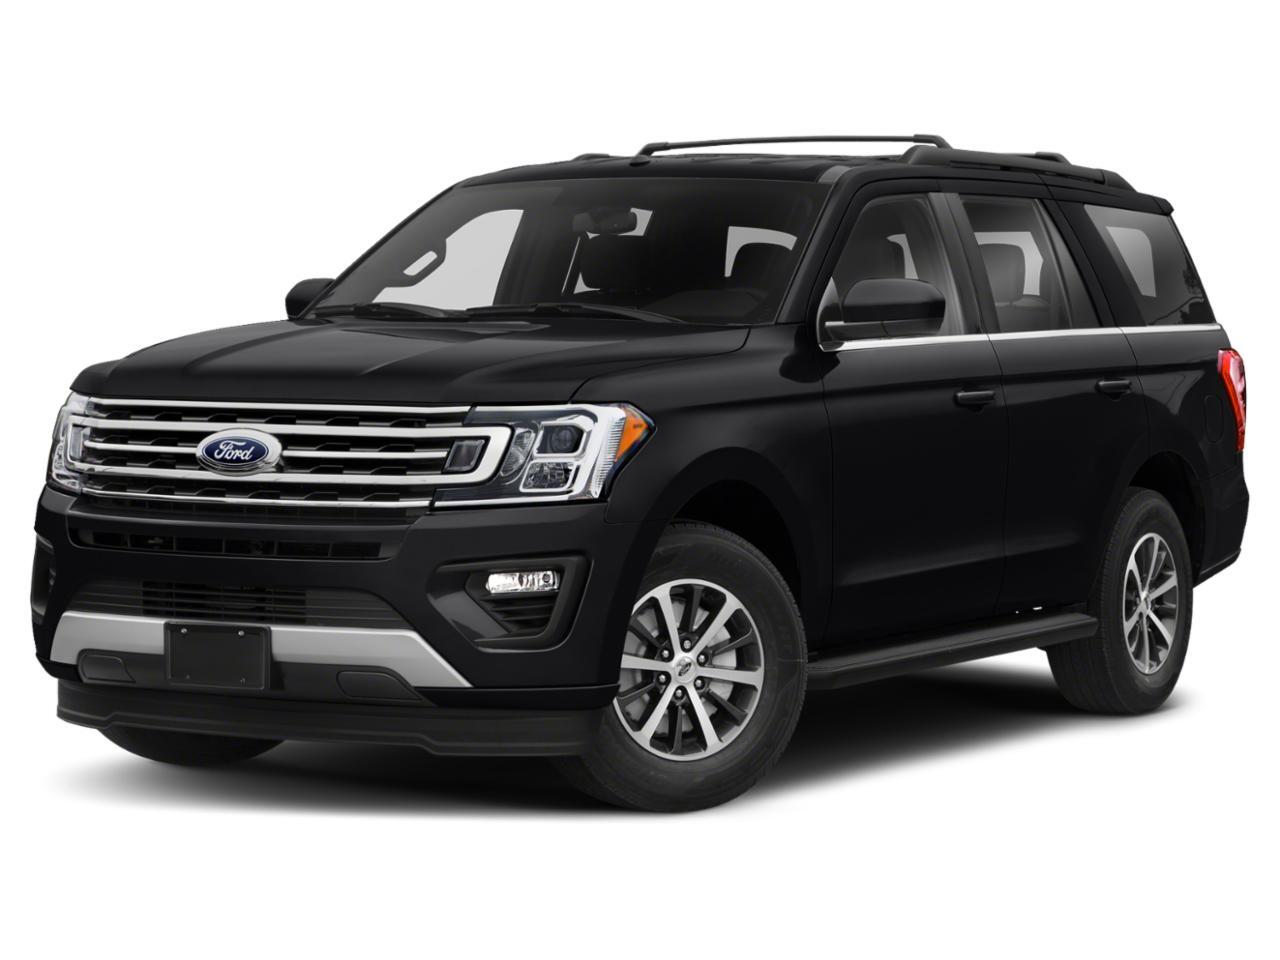 2020 Ford Expedition XLT 4x4